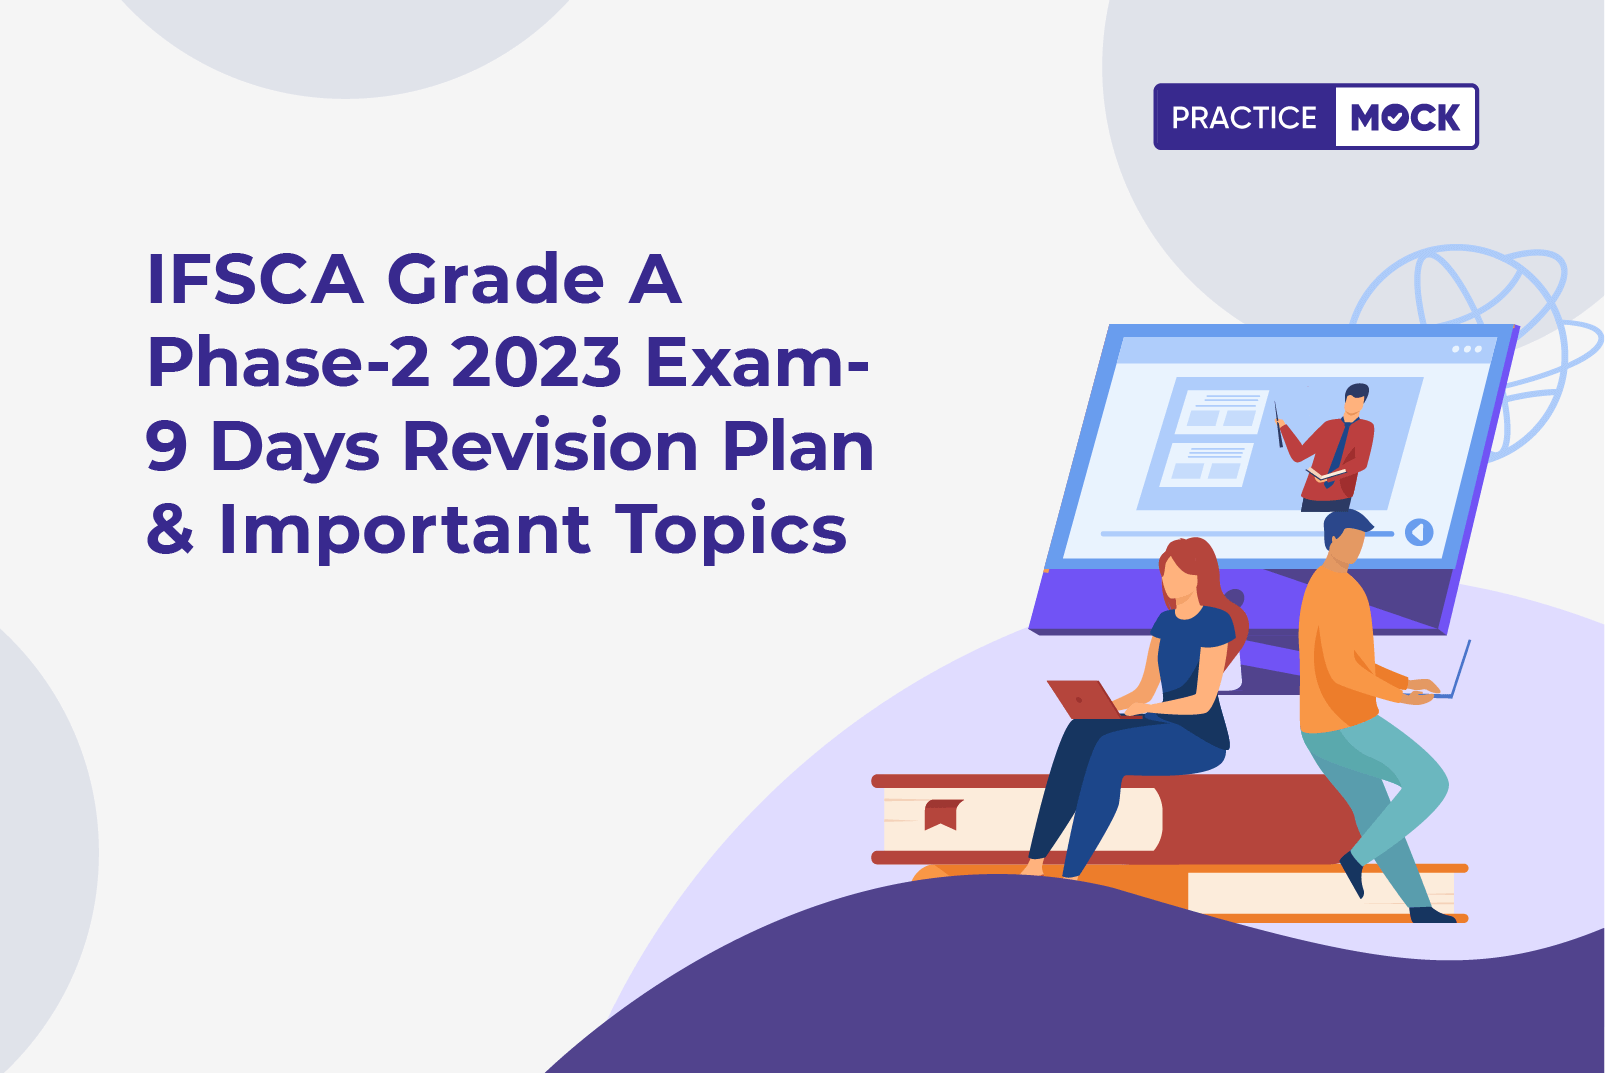 IFSCA Grade A Phase 2 2023 Exam-9 Days Revision Plan & Important Topics